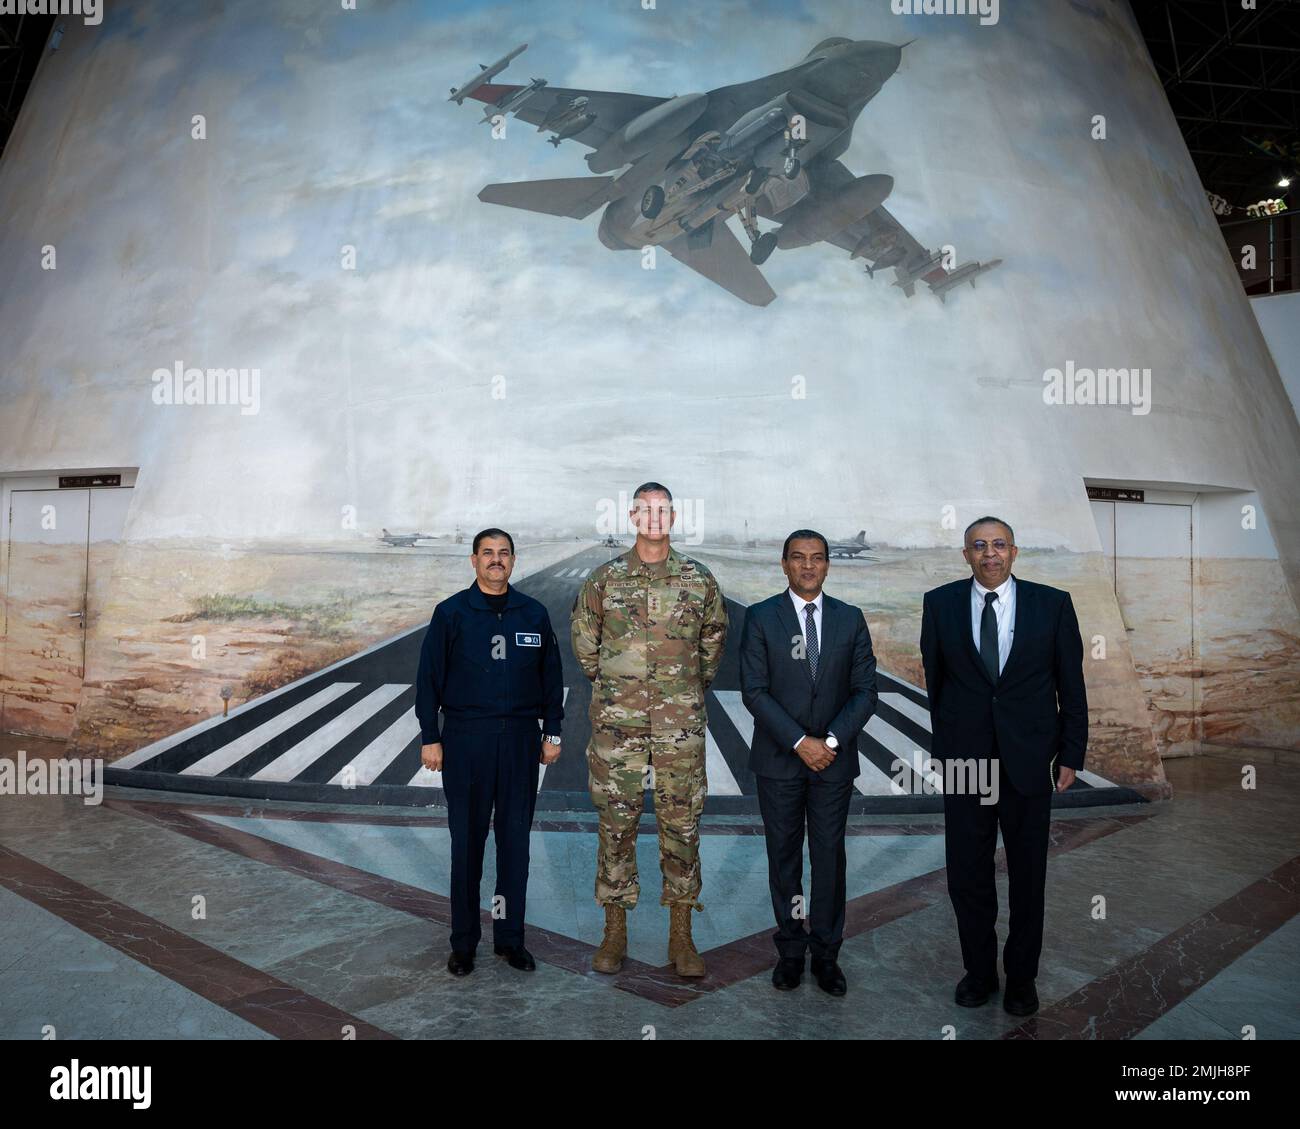 U.S. Air Force Lt. Gen. Alexus G. Grynkewich, Ninth Air Force (Air Forces Central) commander (center-left), poses for a photo with Maj. Gen. Ayman Abbas, Chief, Air Force Training Division (left), Maj. Gen. (Ret.) Magdy Dwaidar, Director, Egyptian Air Force Museum (middle), and Atef Wahba, Cultural Advisor to the Commander, AFCENT, at the Egyptian Air Force Museum in Cairo, Egypt, Aug. 29, 2022. During his visit, Grynkewich experienced the vibrant culture of Egypt while learning about the country’s unique military history. Stock Photo